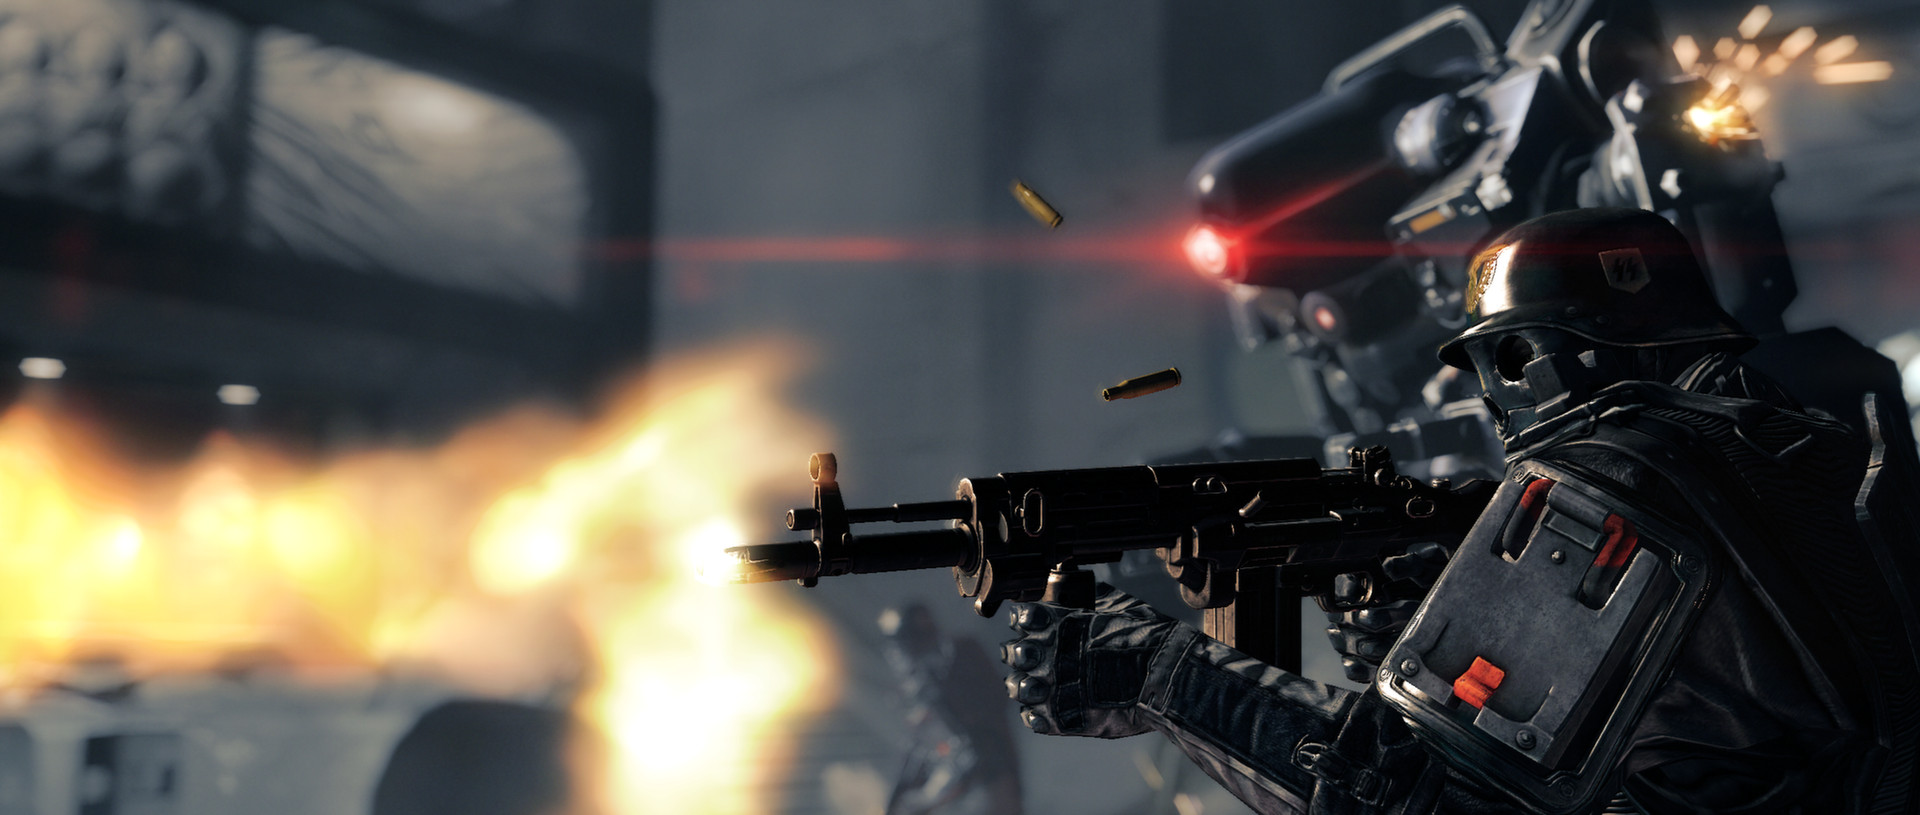 Wolfenstein: The New Order PC System Requirements - Core i7 and 64-Bit Only  - Legit Reviews